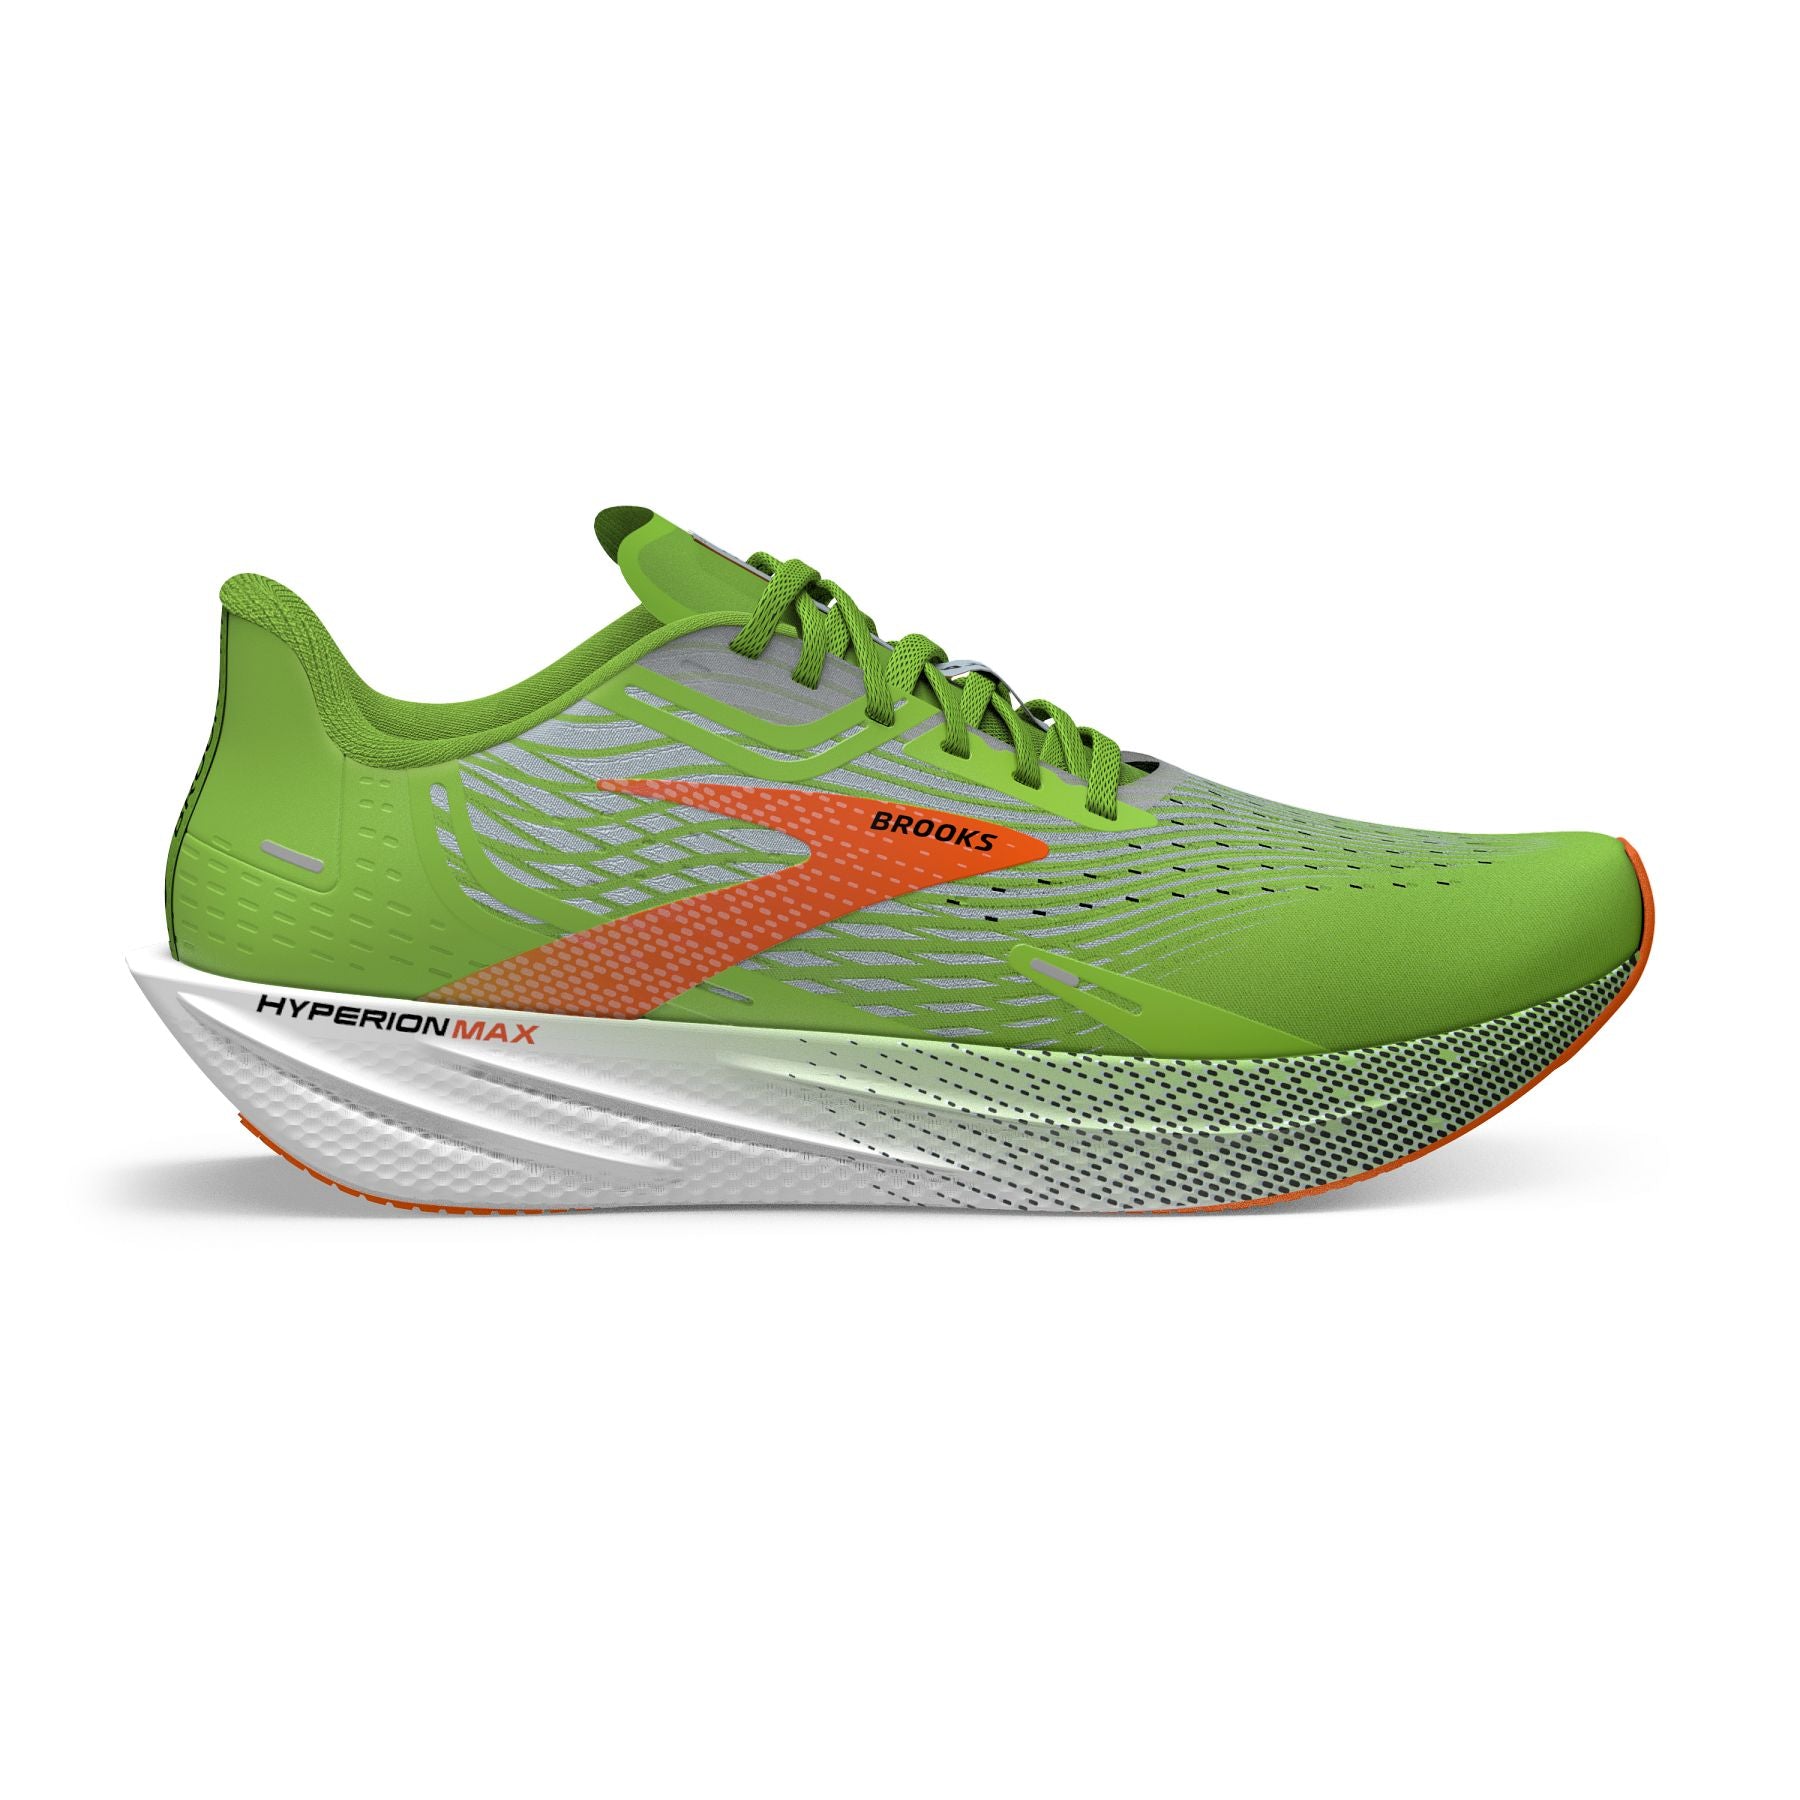 Lateral view of the Men's Hyperion Max in Green Gecko/Red Orange/White